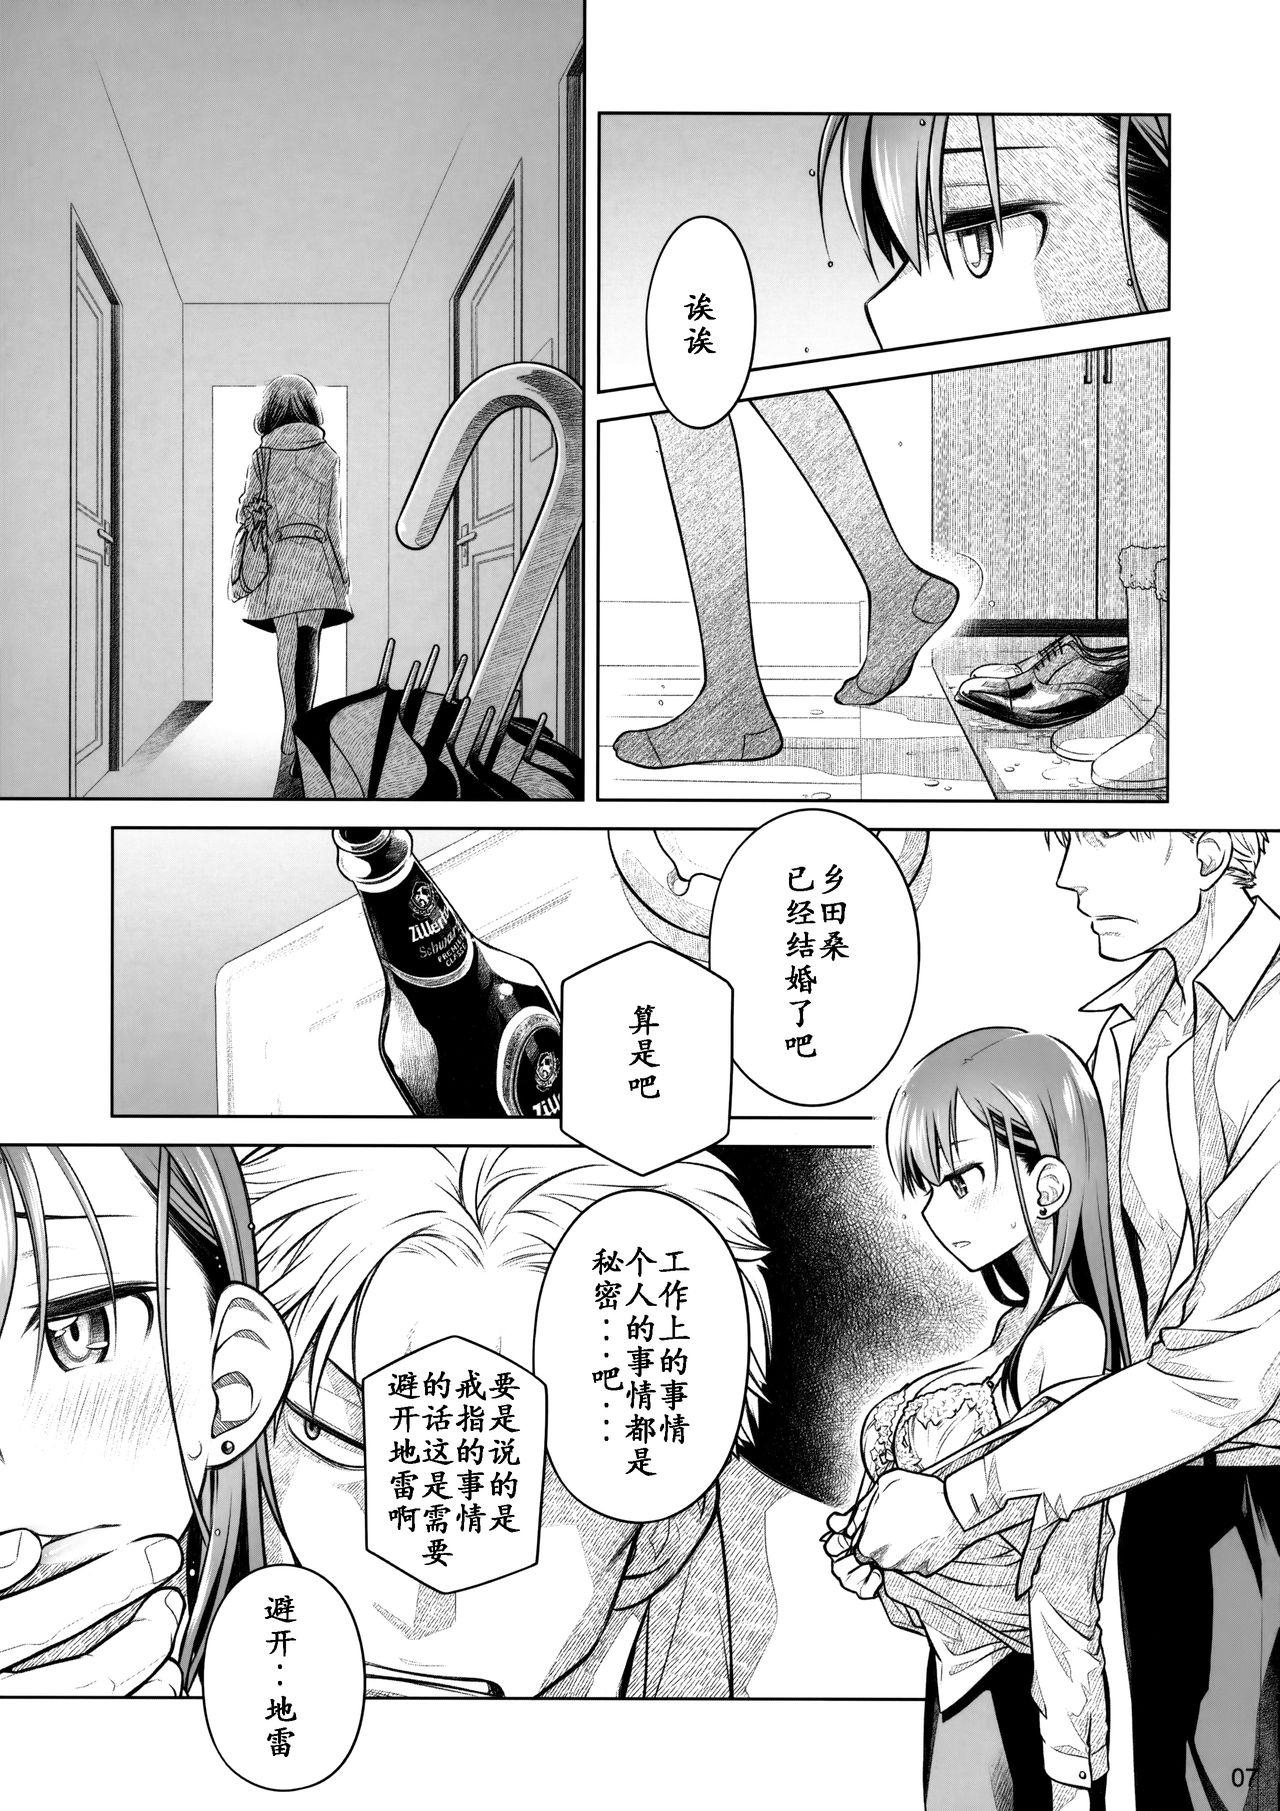 Ass Sex Stay by Me Zenjitsutan Fragile S - Stay by me "Prequel" Exposed - Page 6